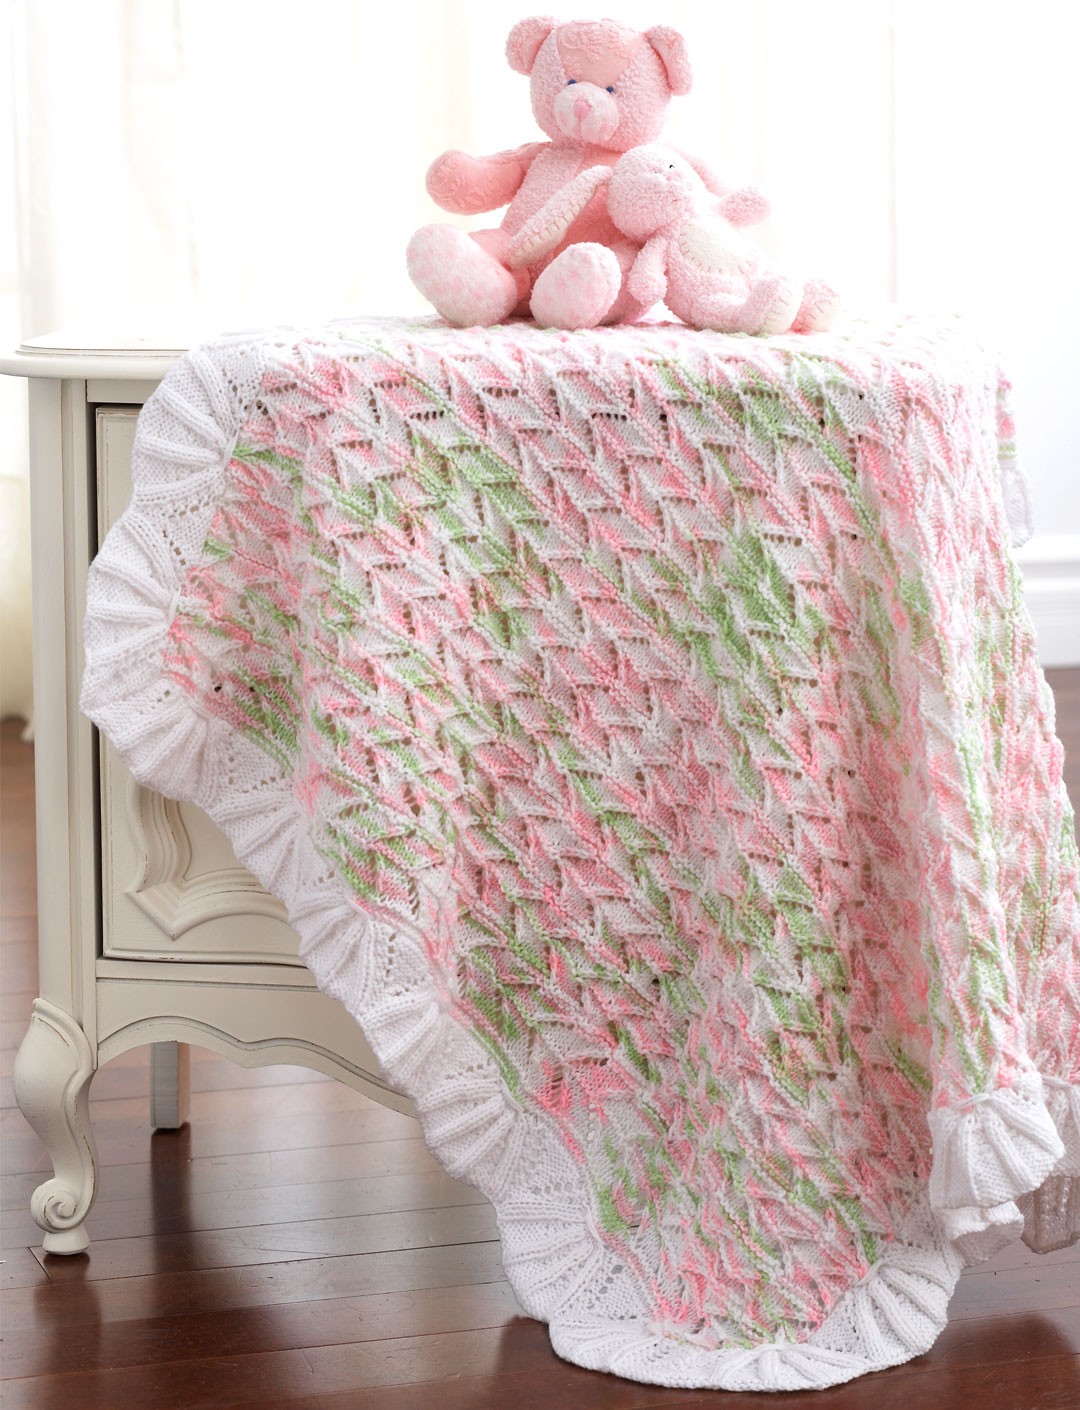 Free knitting pattern for Lacy Blanket with heirloom look and more baby blanket knitting patterns